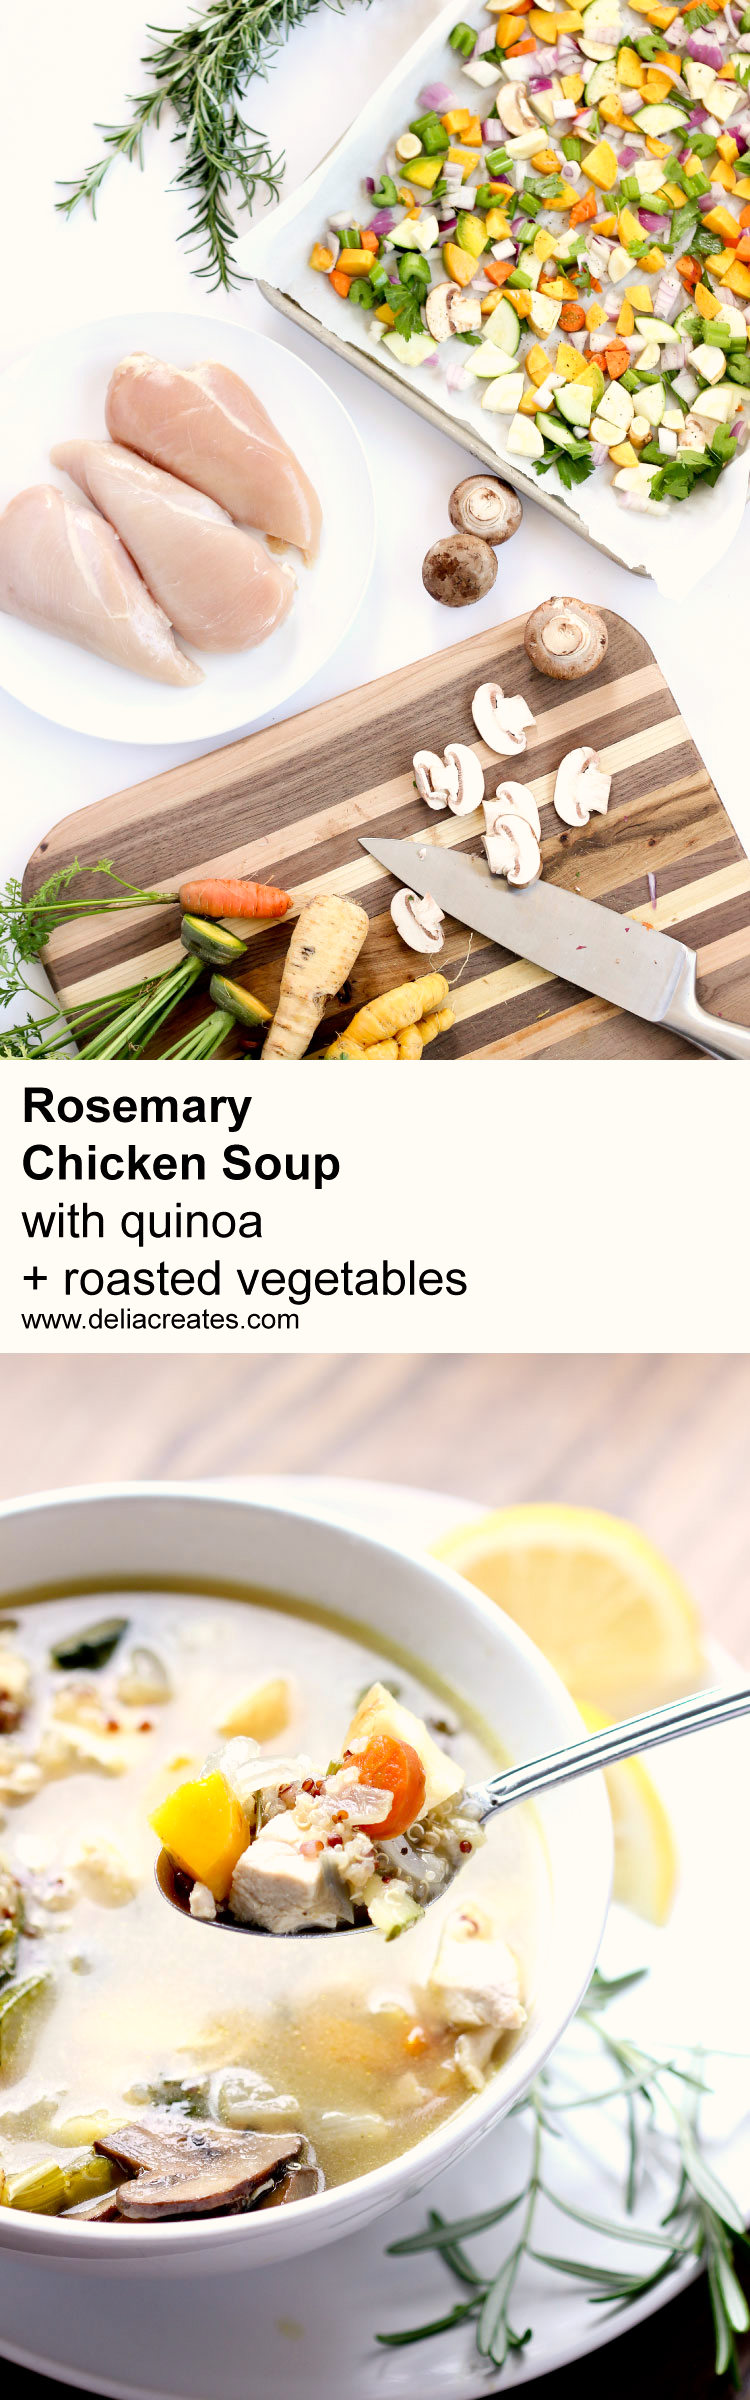 Rosemary Chicken Soup with Quinoa + Roasted Vegetables // www.deliacreates.com